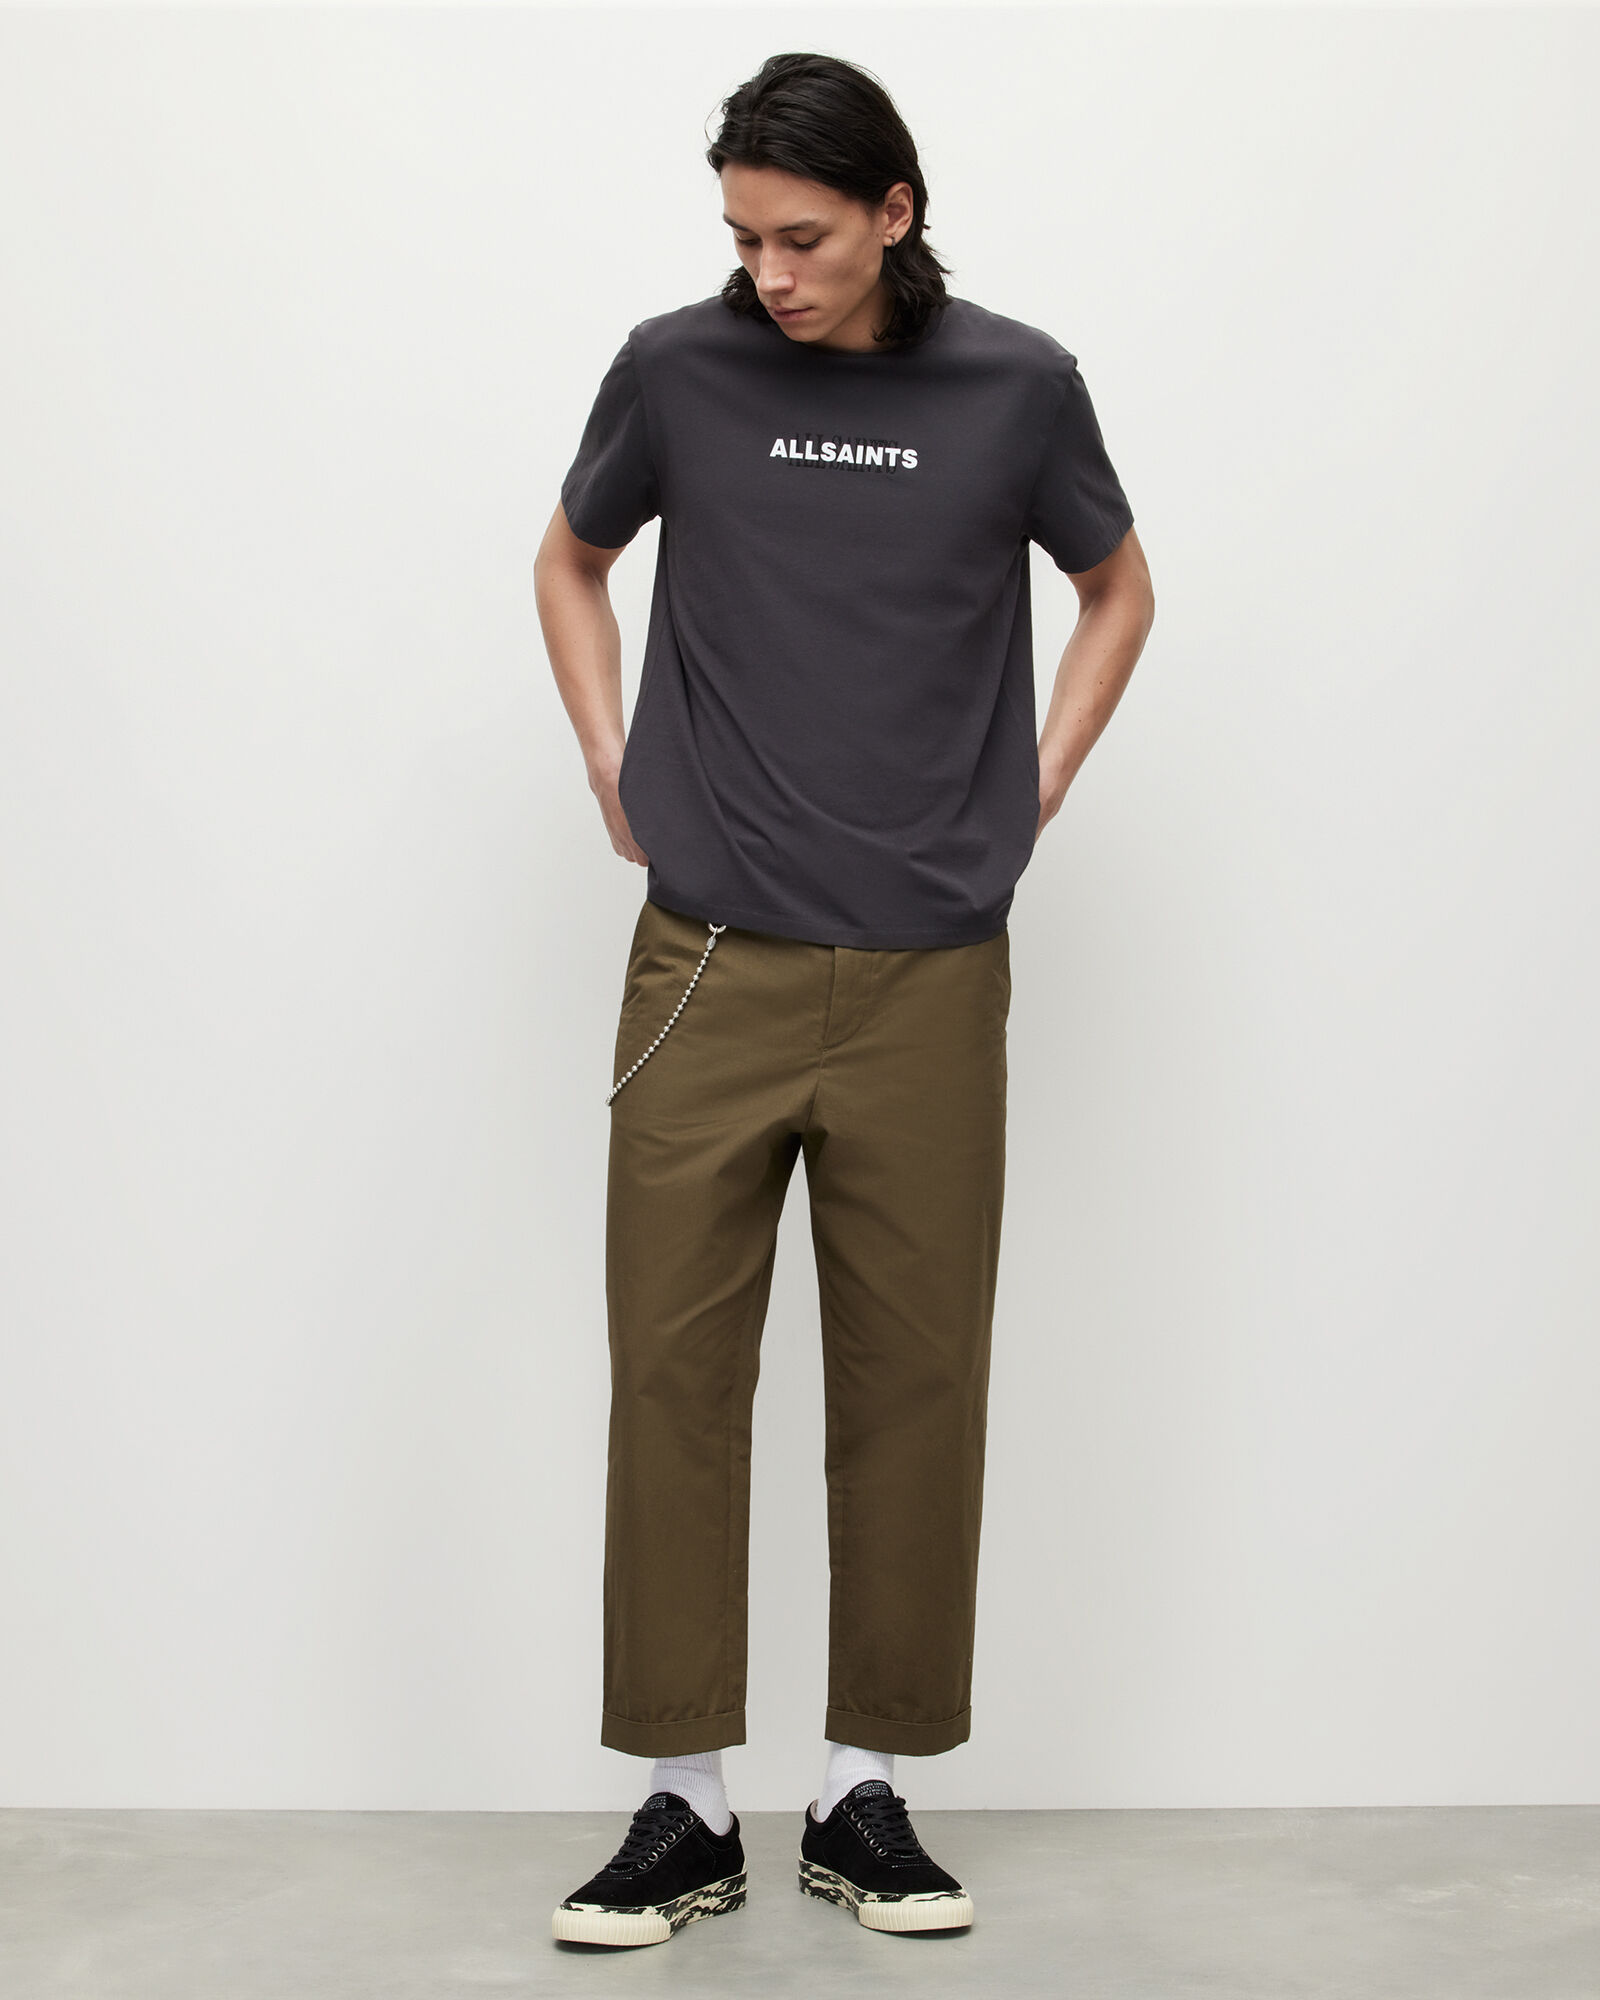 Discover more than 76 all saints trousers latest - in.duhocakina